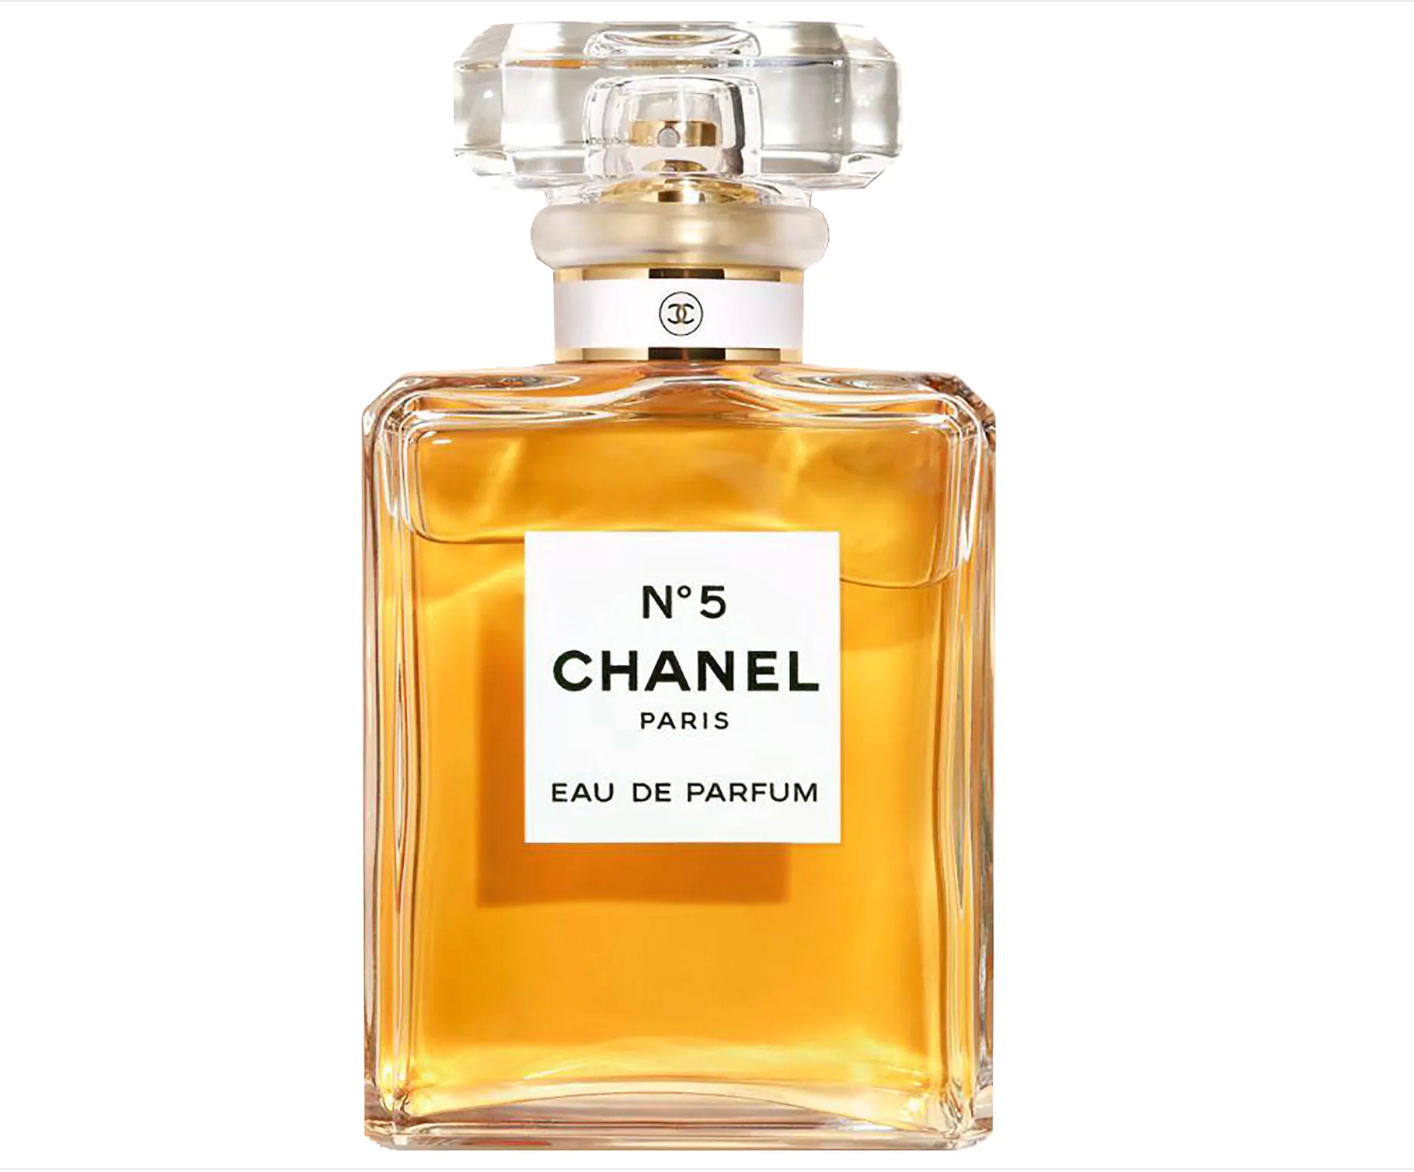 7 Fragrances To Get You In The Mood This Valentine’s Day